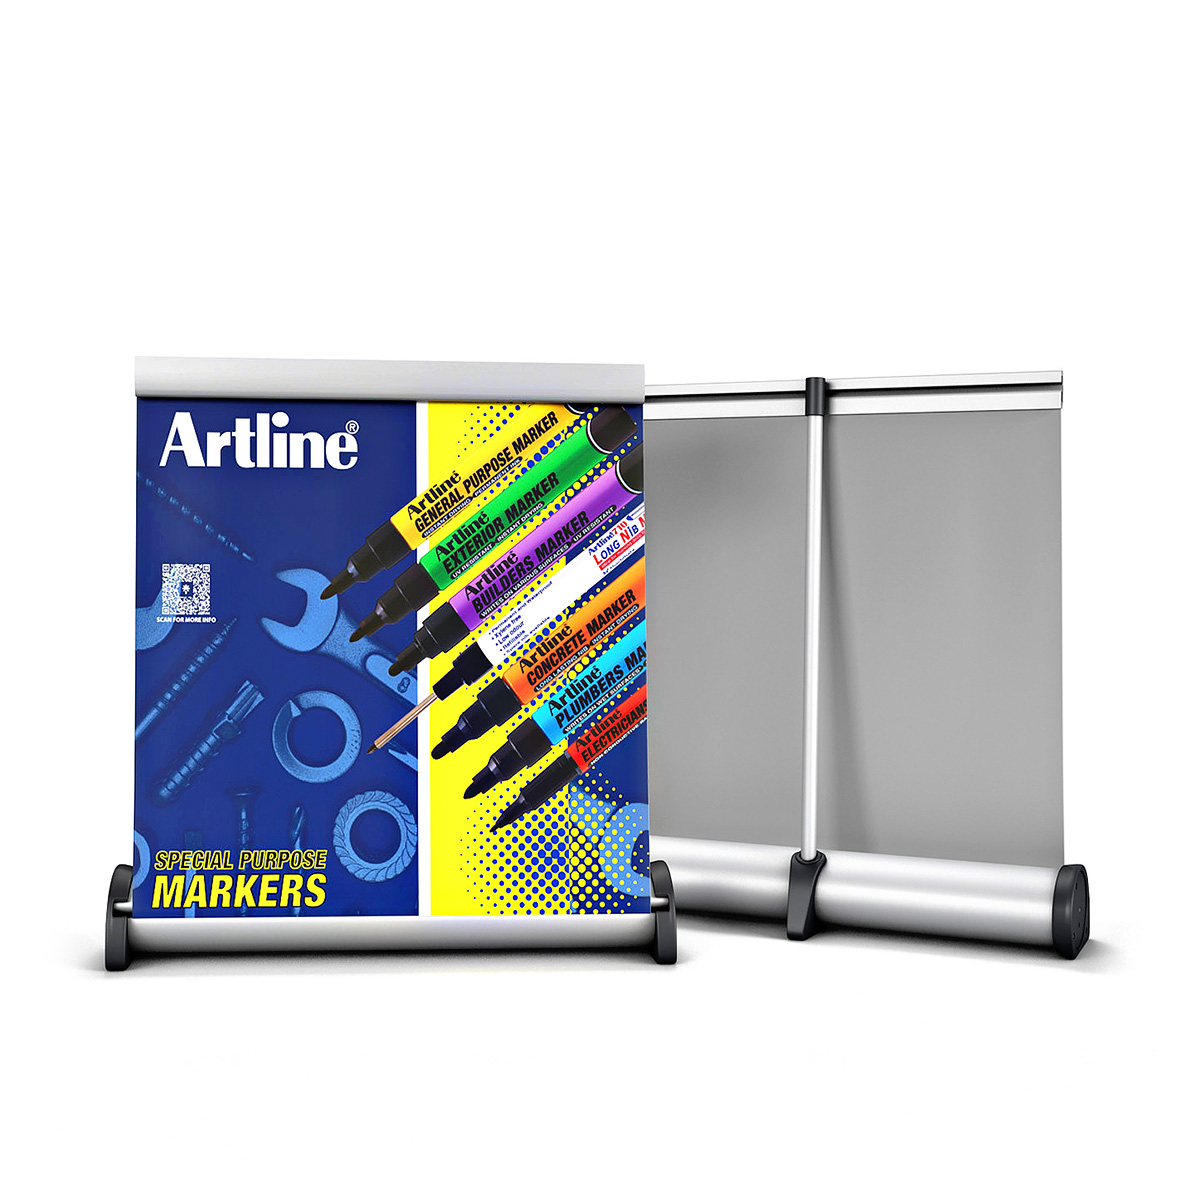 Tabletop Roller Banner. Buy ENVOY® MINI Retractable Table Banners With Banner Printing from XL Displays. Choose 400mm, 800m or 1200mm Height Desktop Banners. ENVOY® MINI Includes Custom Print, Aluminium Pull Up Banner Hardware and Fabric Carry Bag.